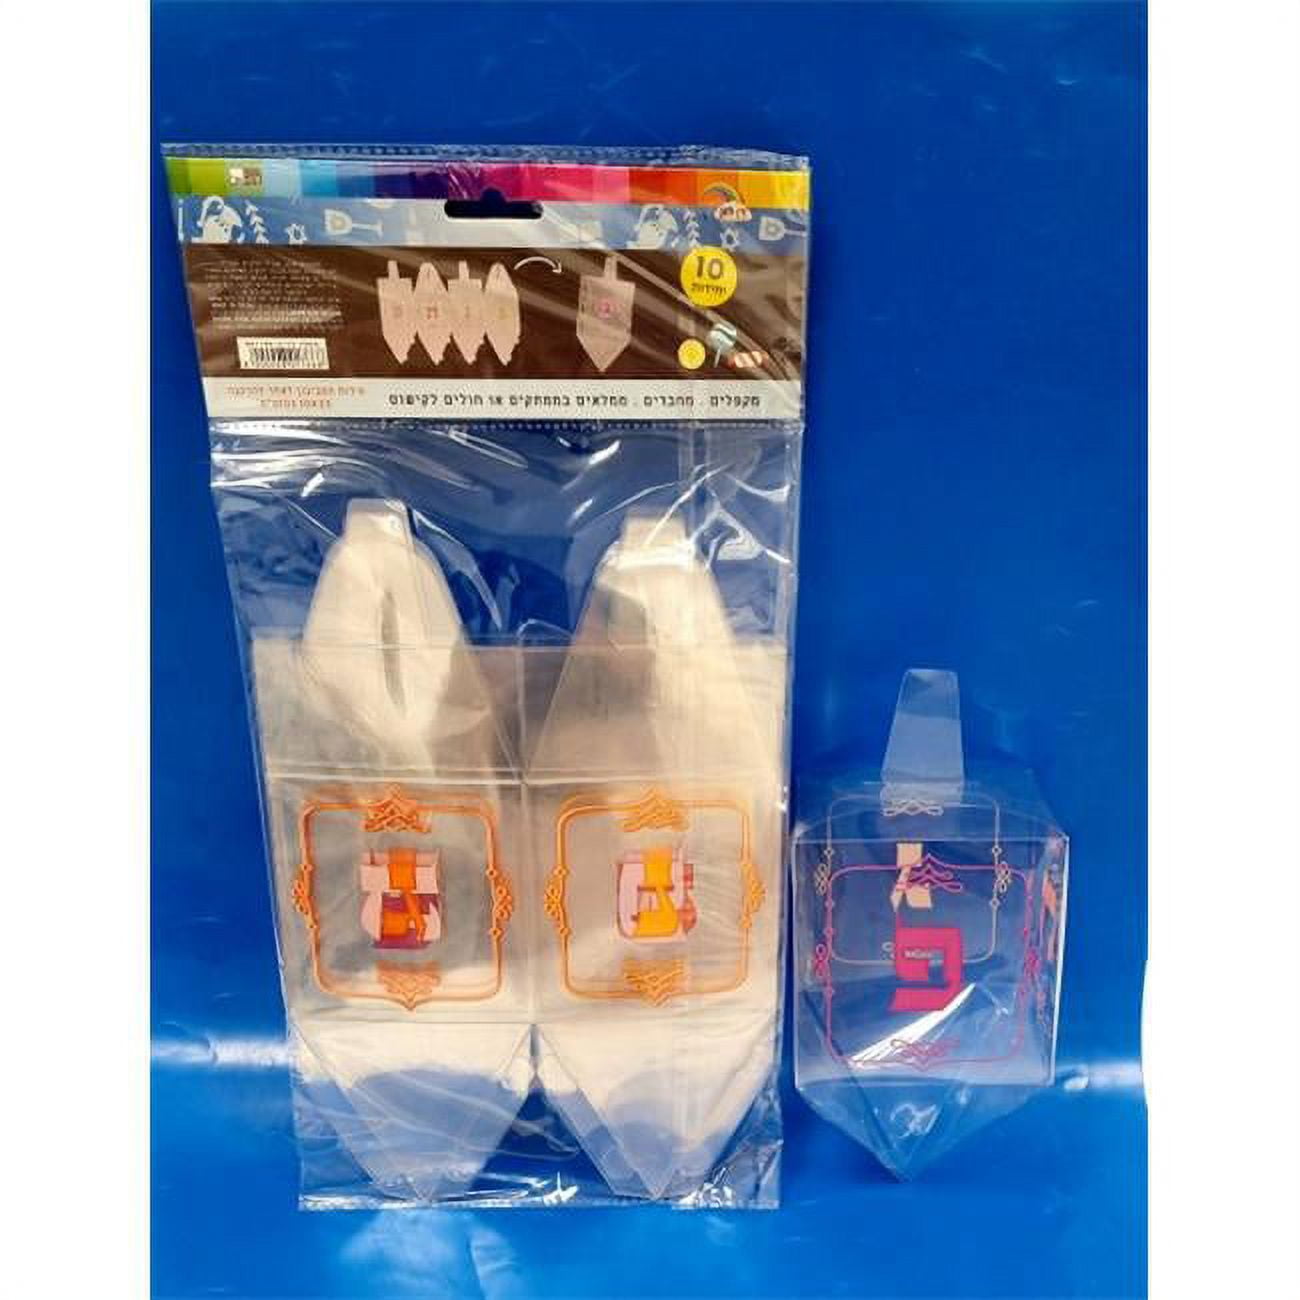 Picture of Dan As 801766 4 x 4 x 9 in. Transparent Dreidel Holder to Assemble Judaica Toys - Pack of 10